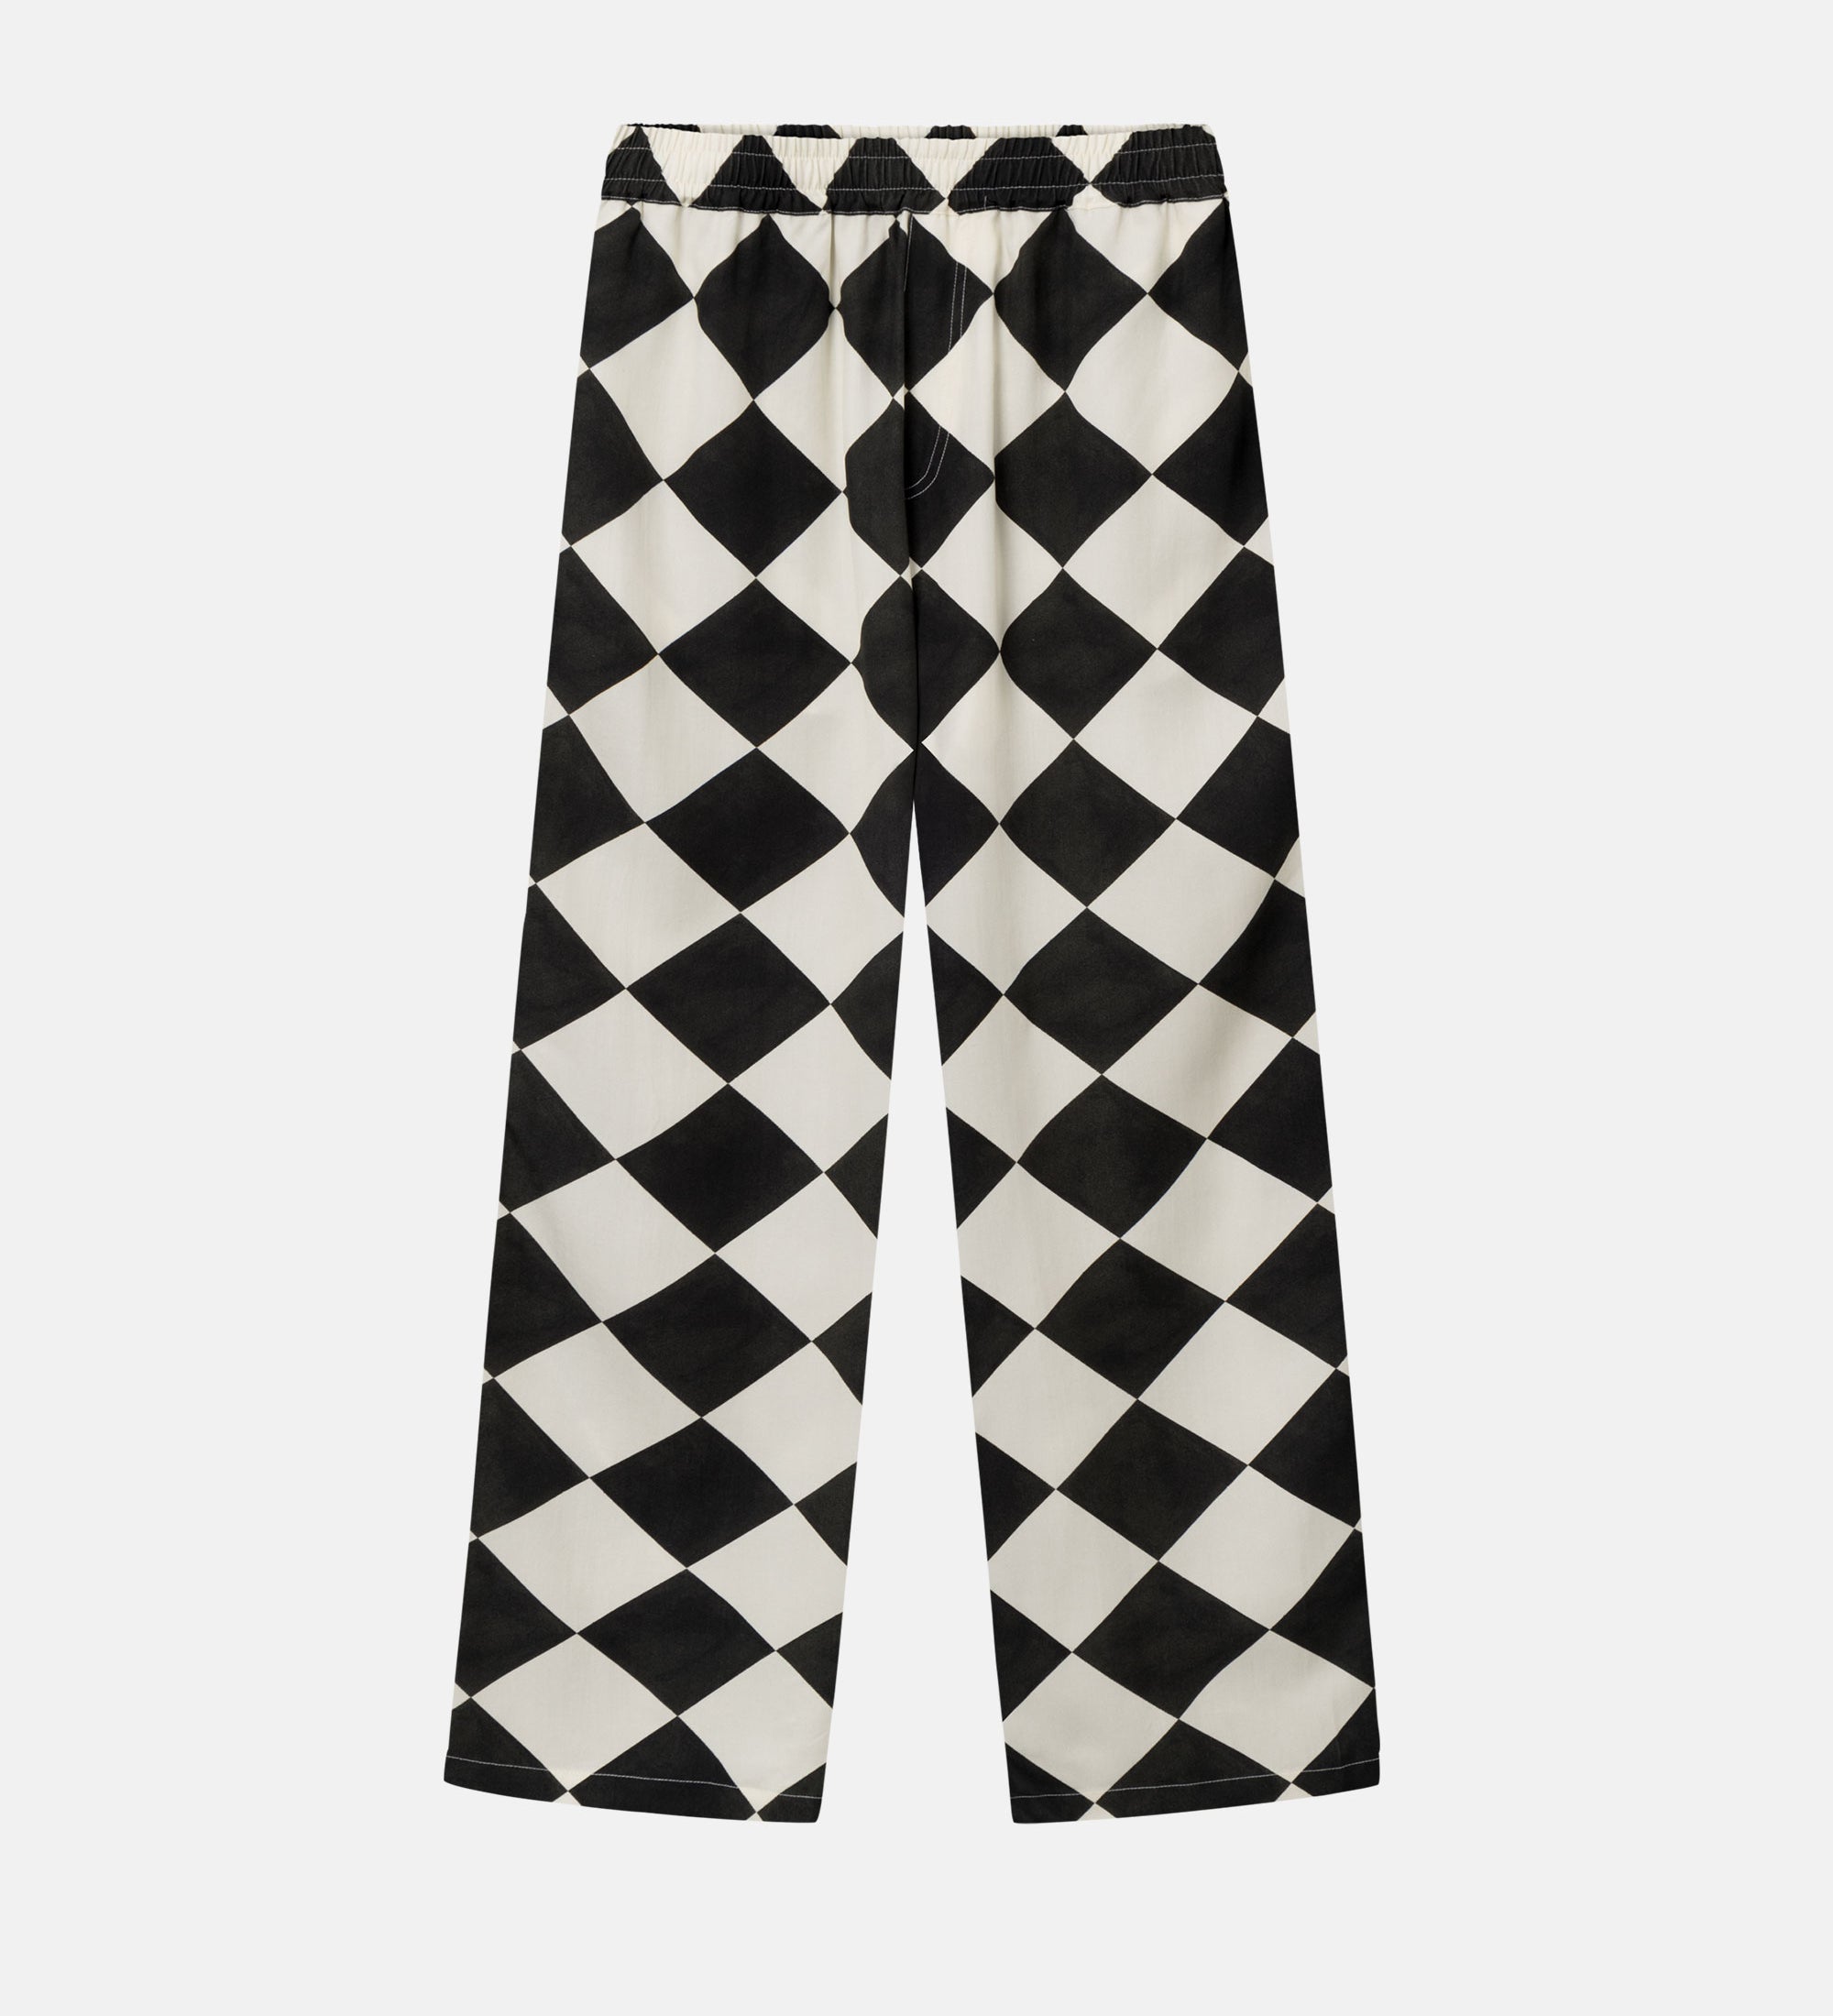 Vacation pants with a black and white checkered pattern, two front pockets, and drawstrings.